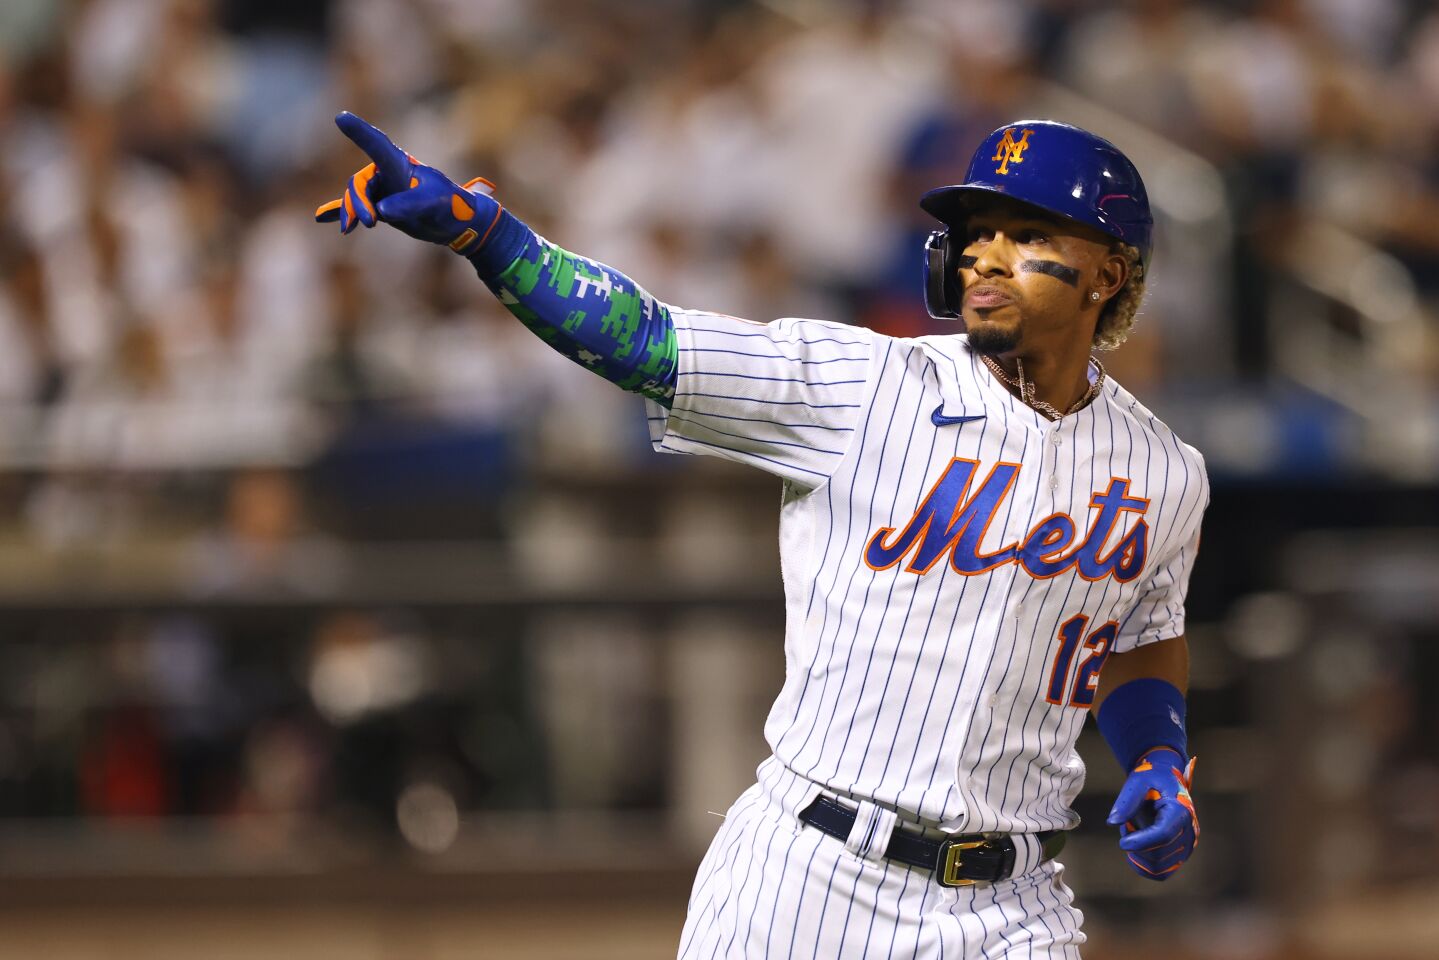 17 | New York Mets (72-72; LW: 18)Francisco Lindor let his bat do his talking: His three-homer game in a chippy series finale moved the Mets to within three games of a wild-card spot.